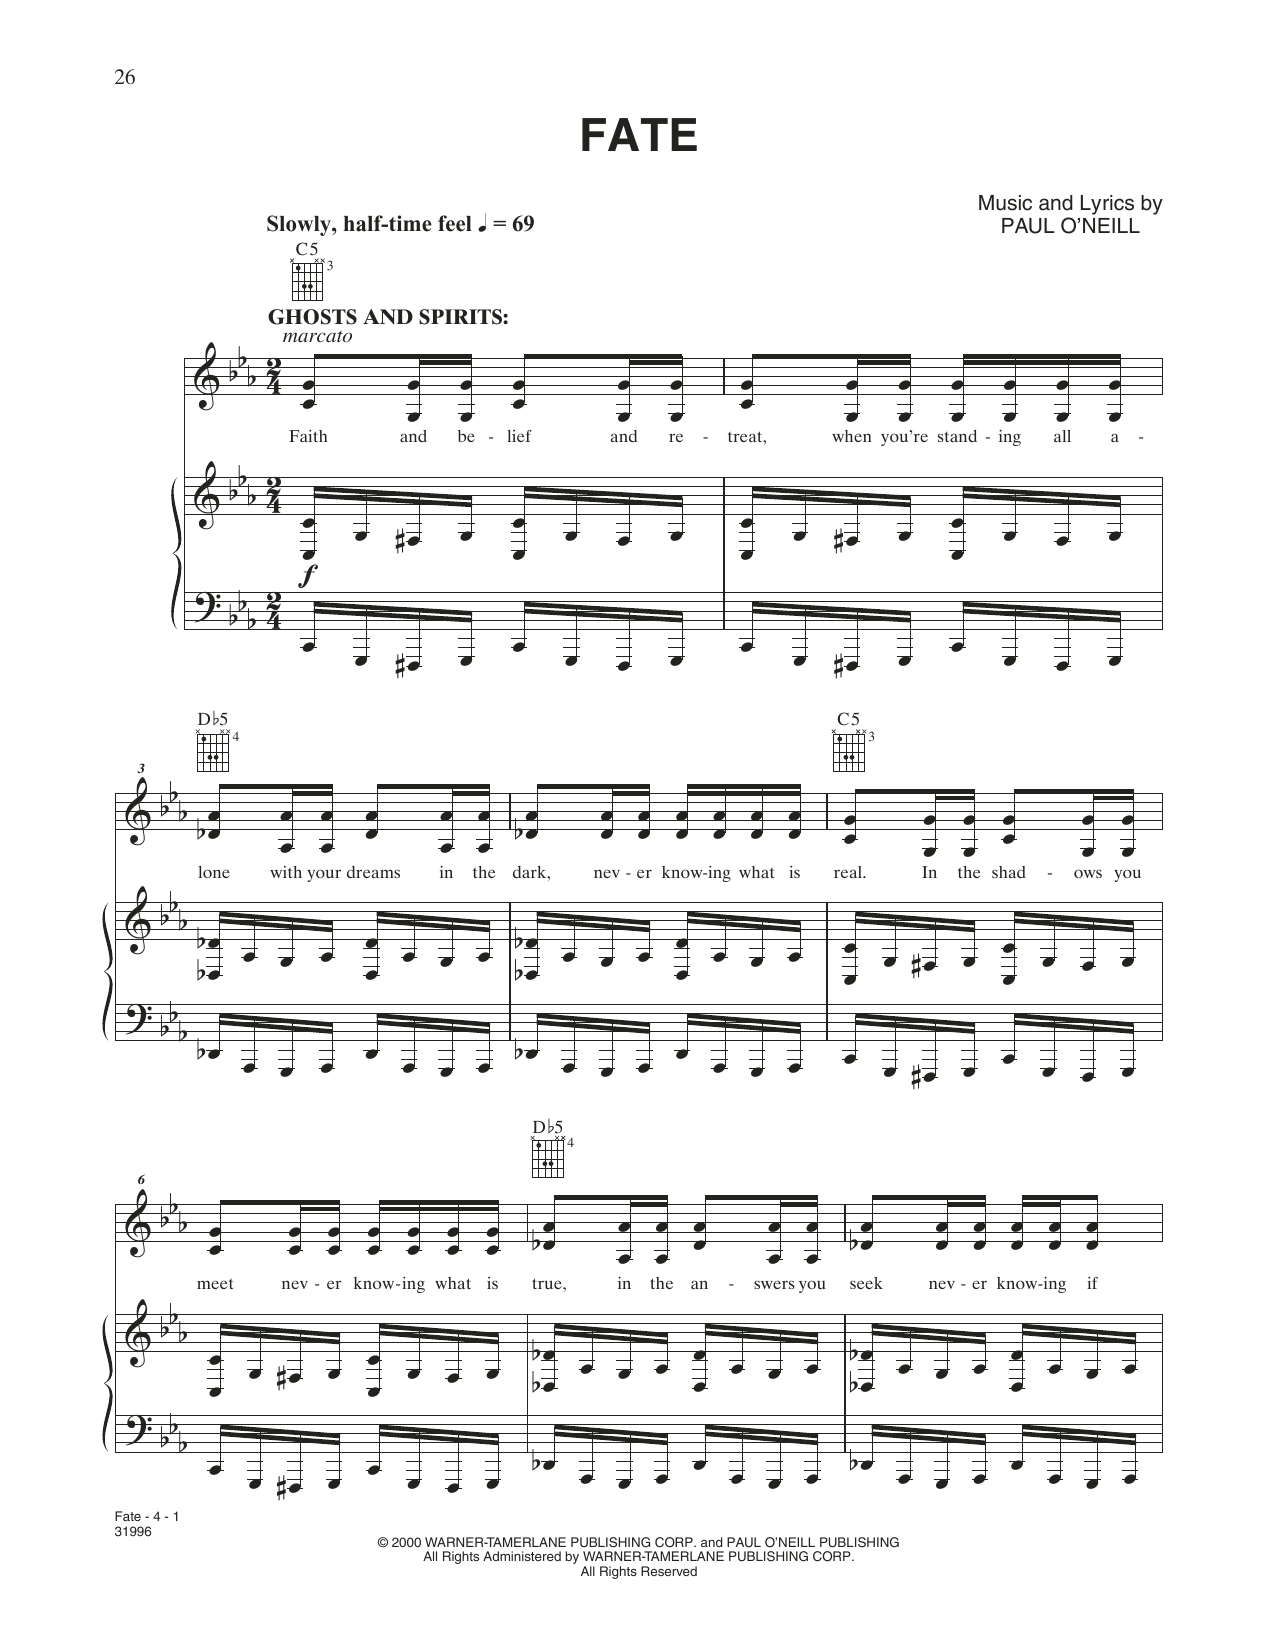 Download Trans-Siberian Orchestra Fate Sheet Music